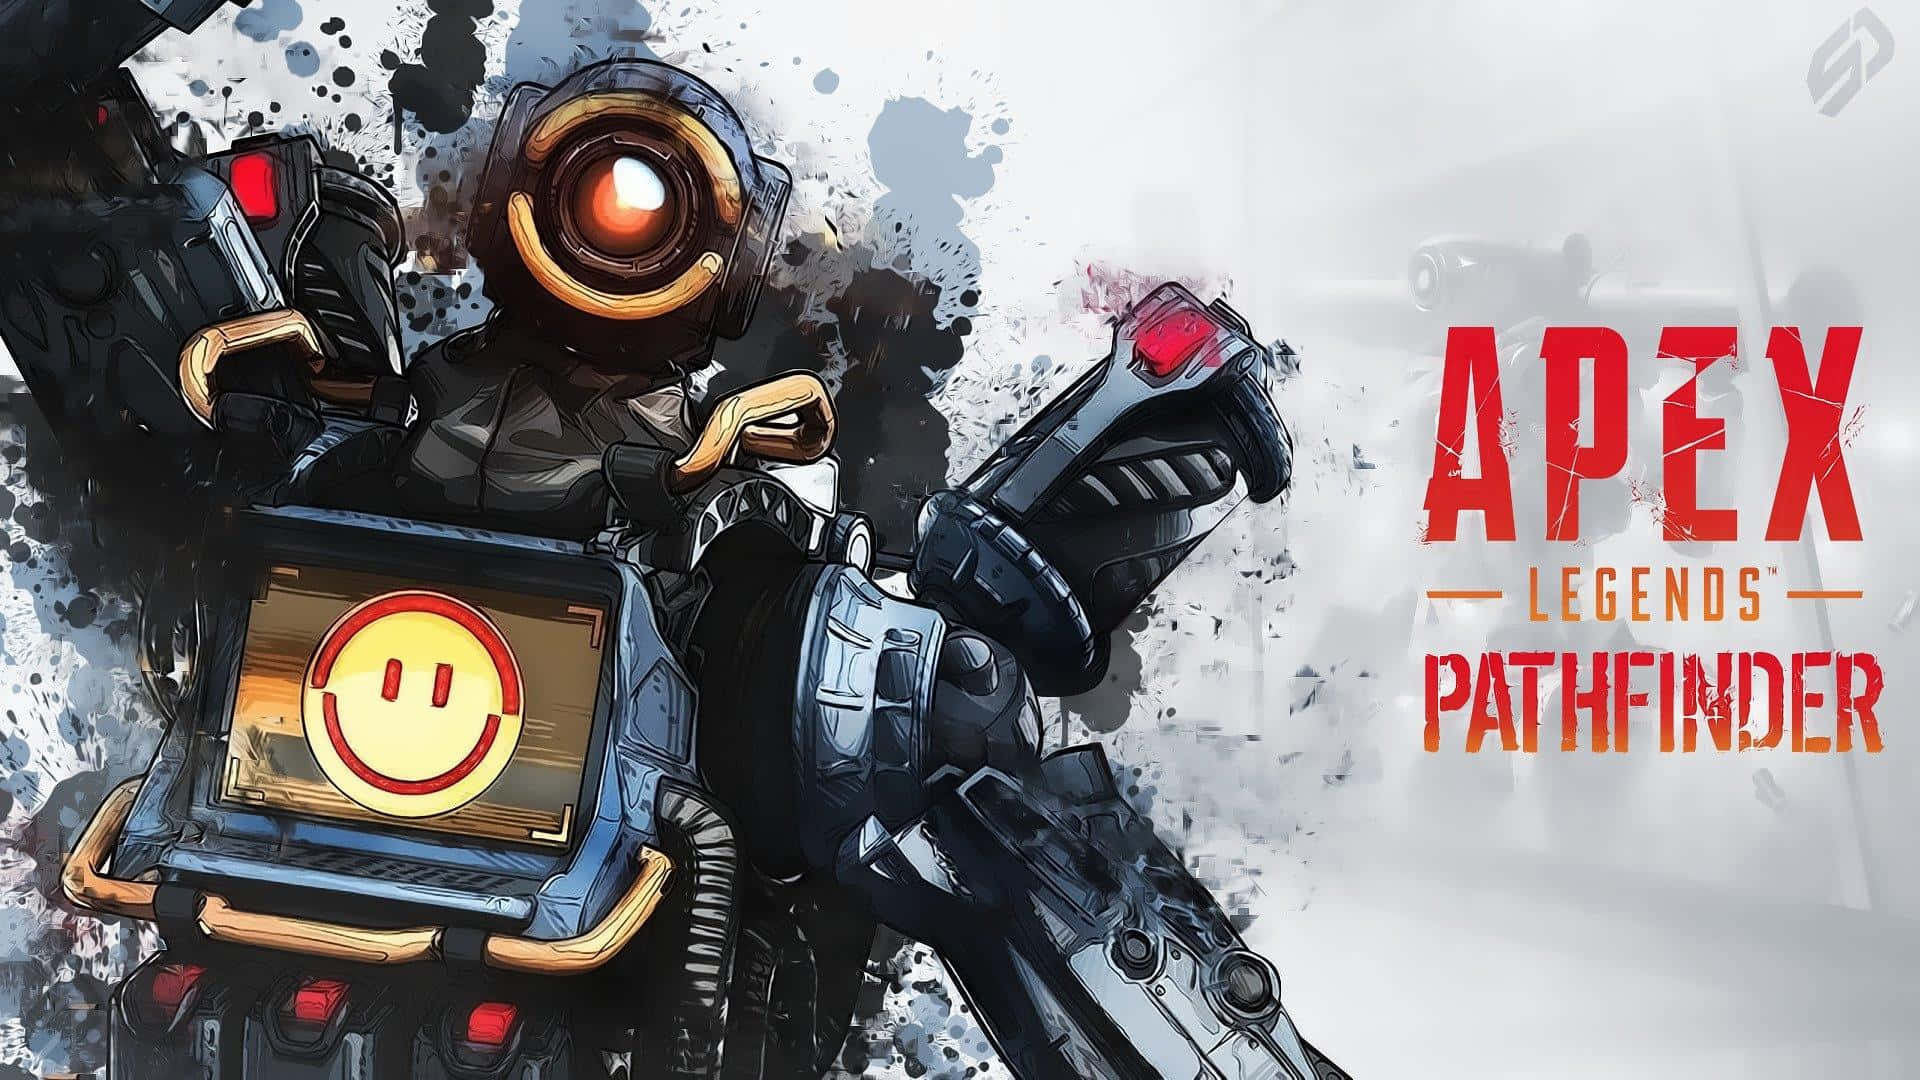 The ambitious Pathfinder ready to explore Apex Legends. Wallpaper